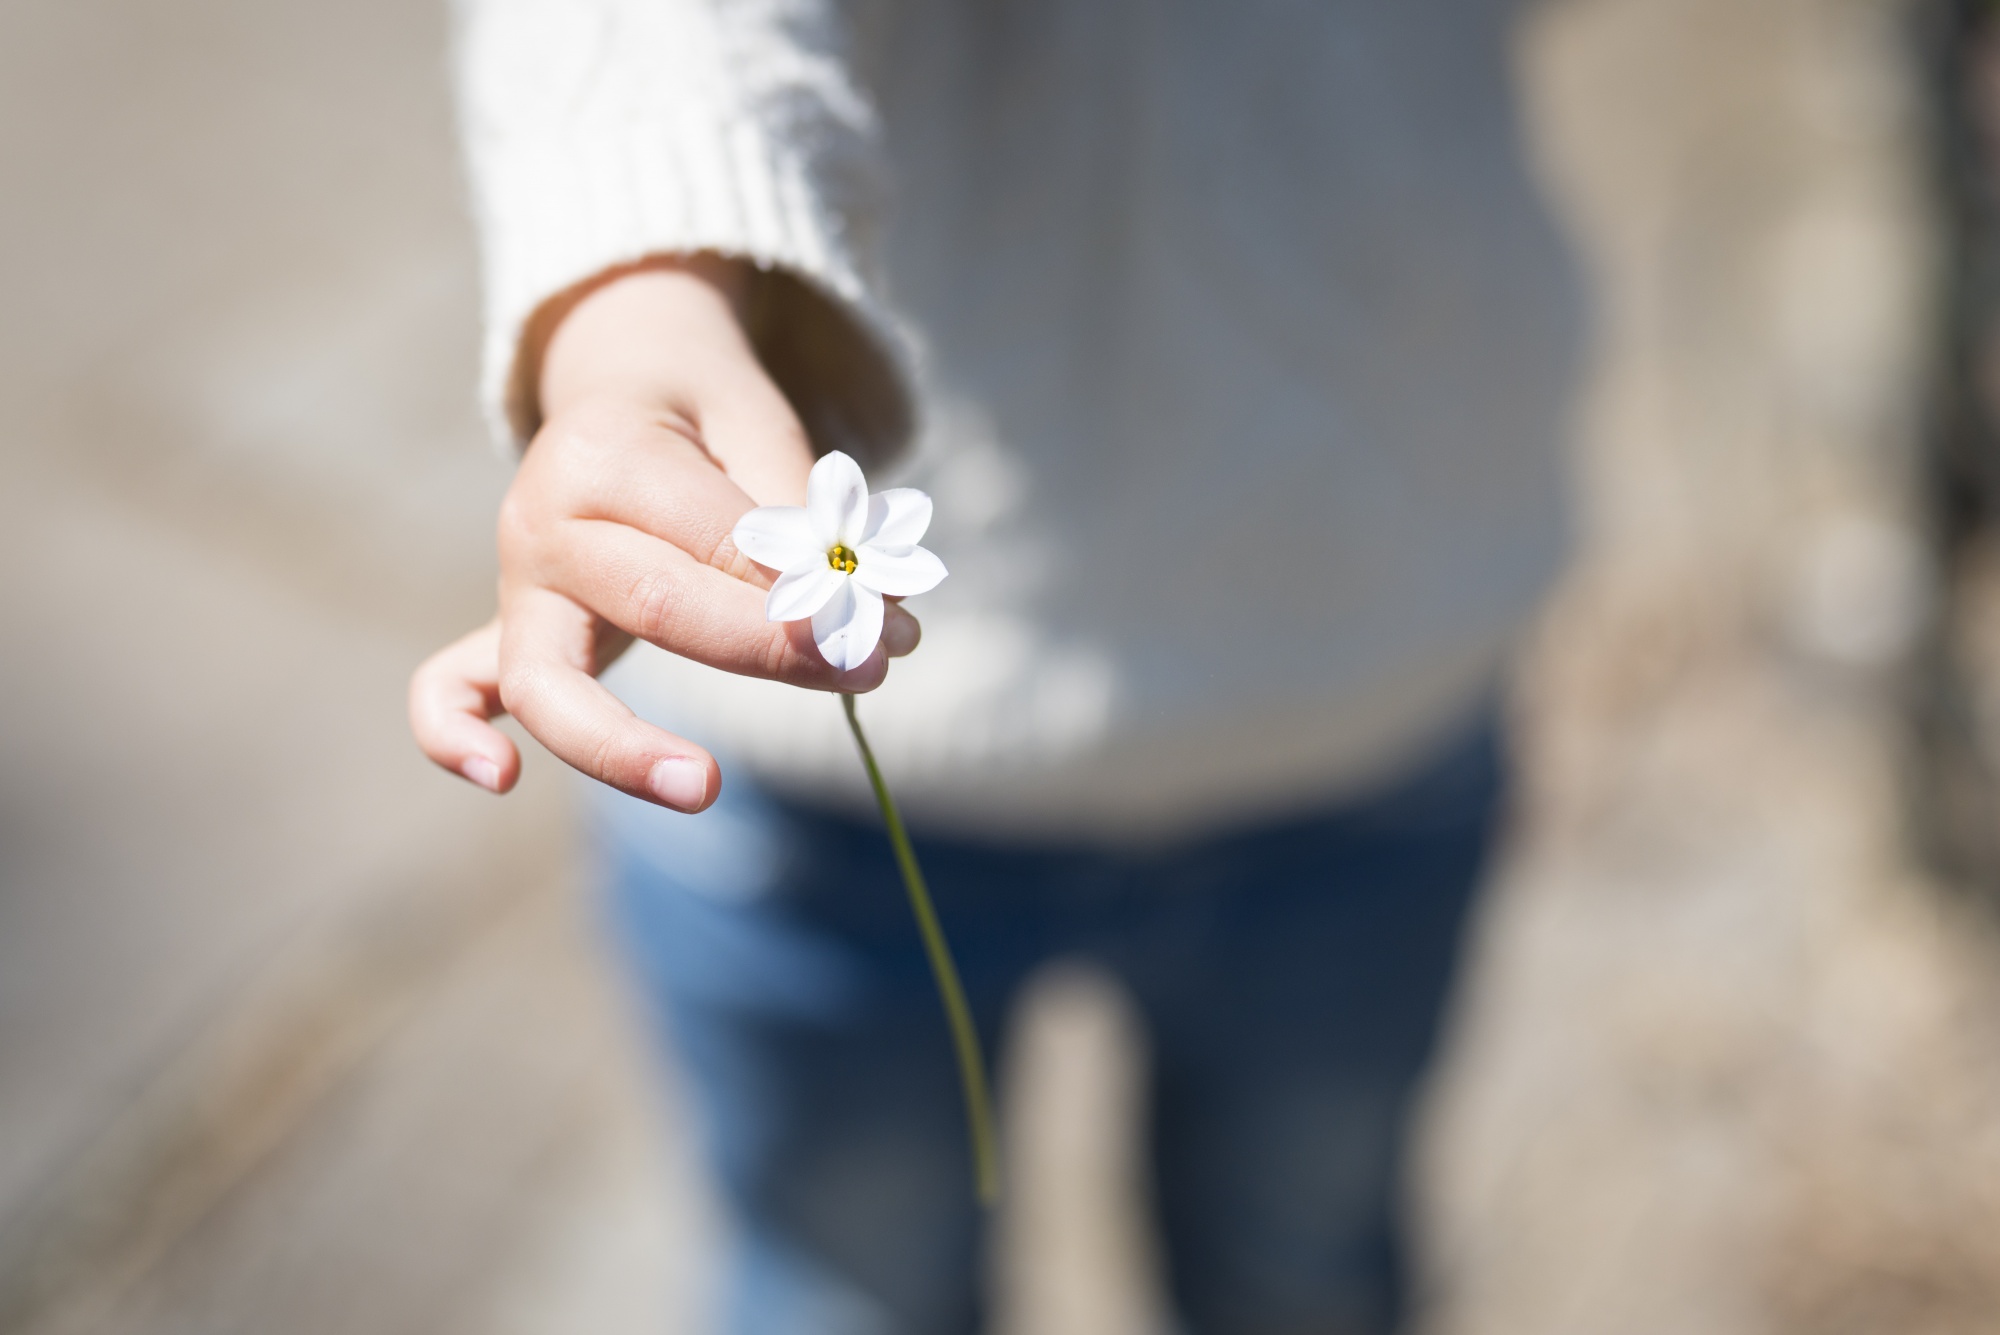 Gratitude for the small things: torso shot of woman in white sweater with an outstretched arm holding a small white flower